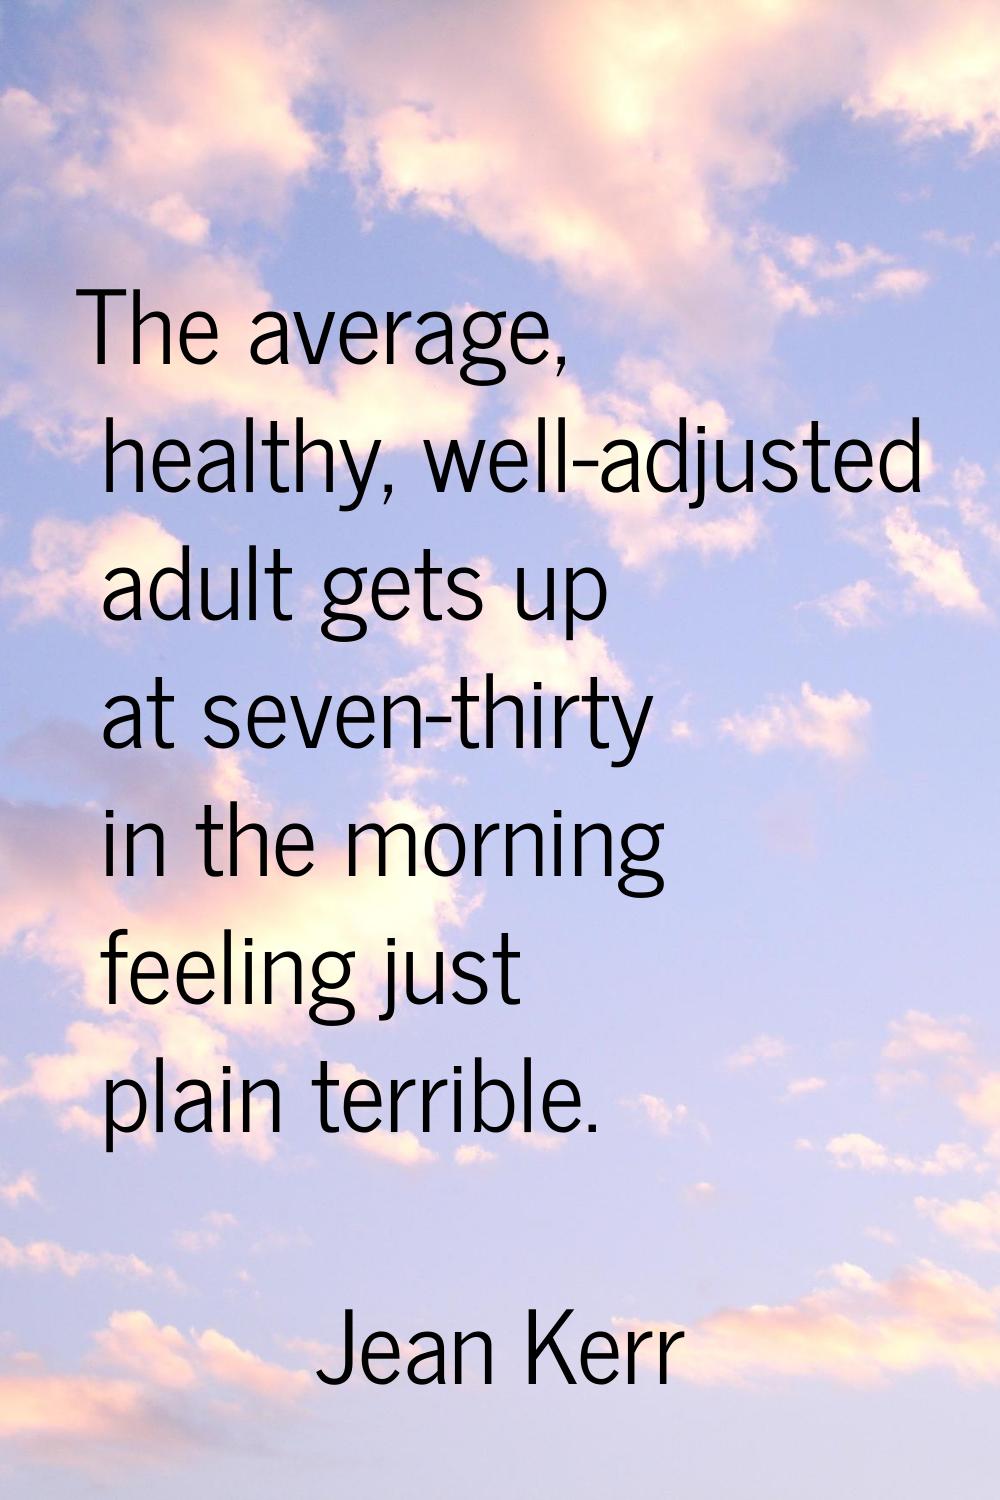 The average, healthy, well-adjusted adult gets up at seven-thirty in the morning feeling just plain